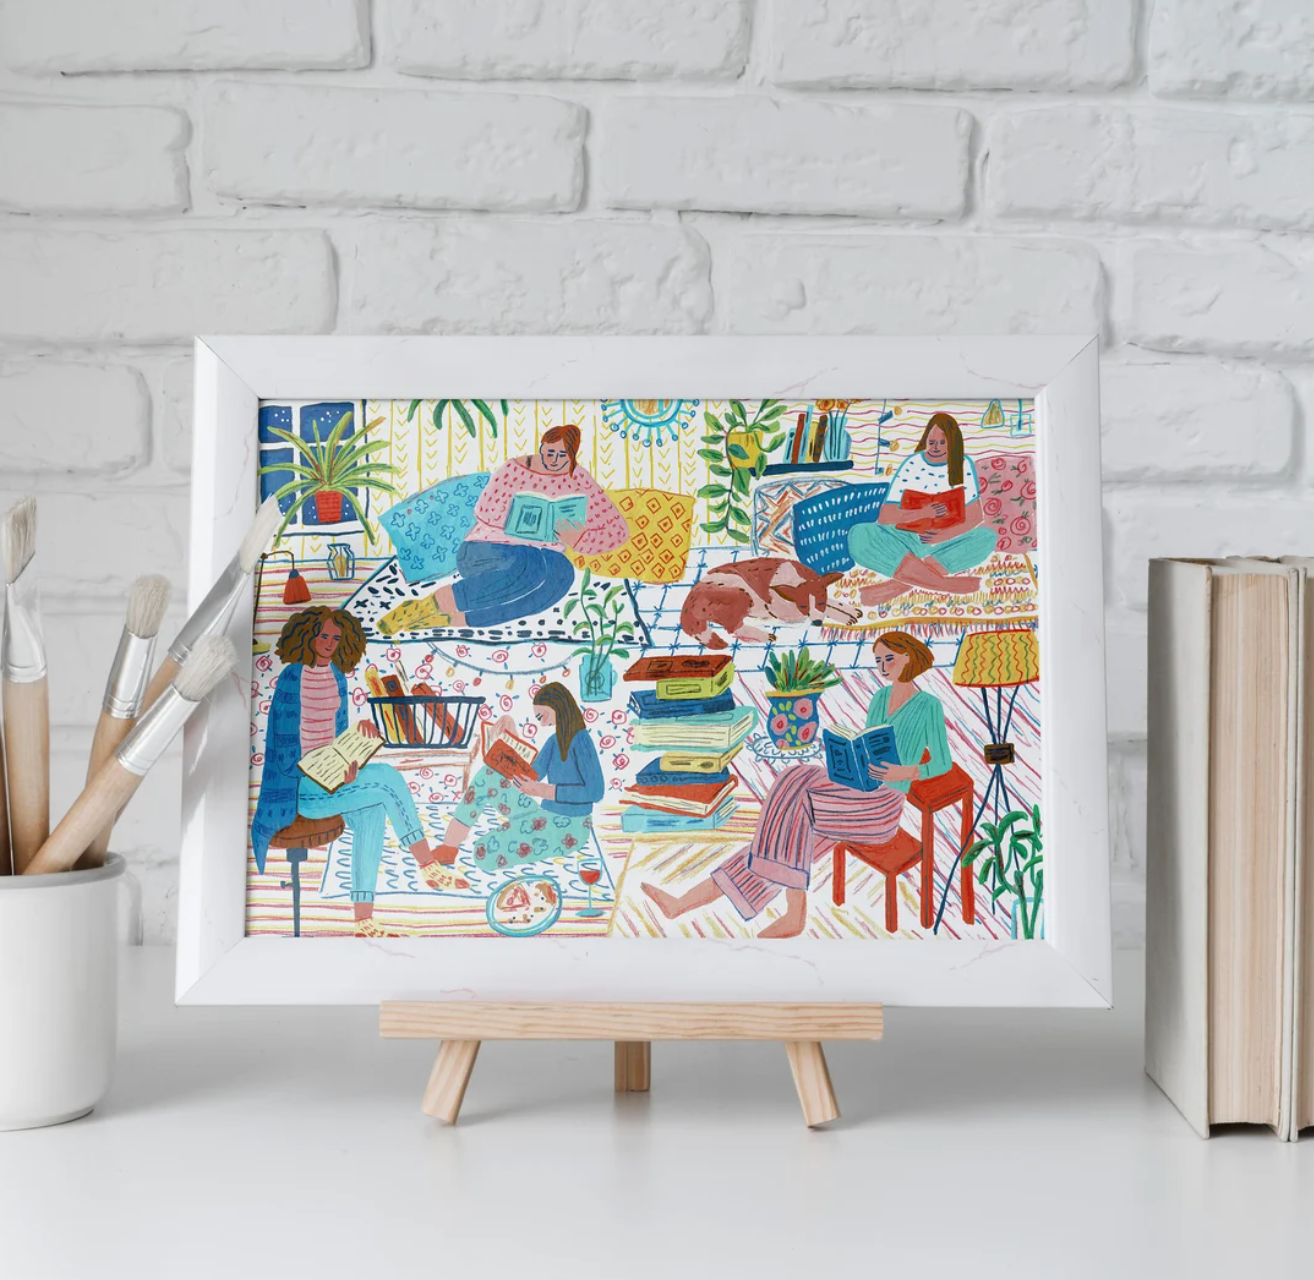 An art print of a colorfully illustrated scene with women of various races reading books on cozy chairs and cushions, surrounded by stacks of books as well as plants and a sleeping dog. 